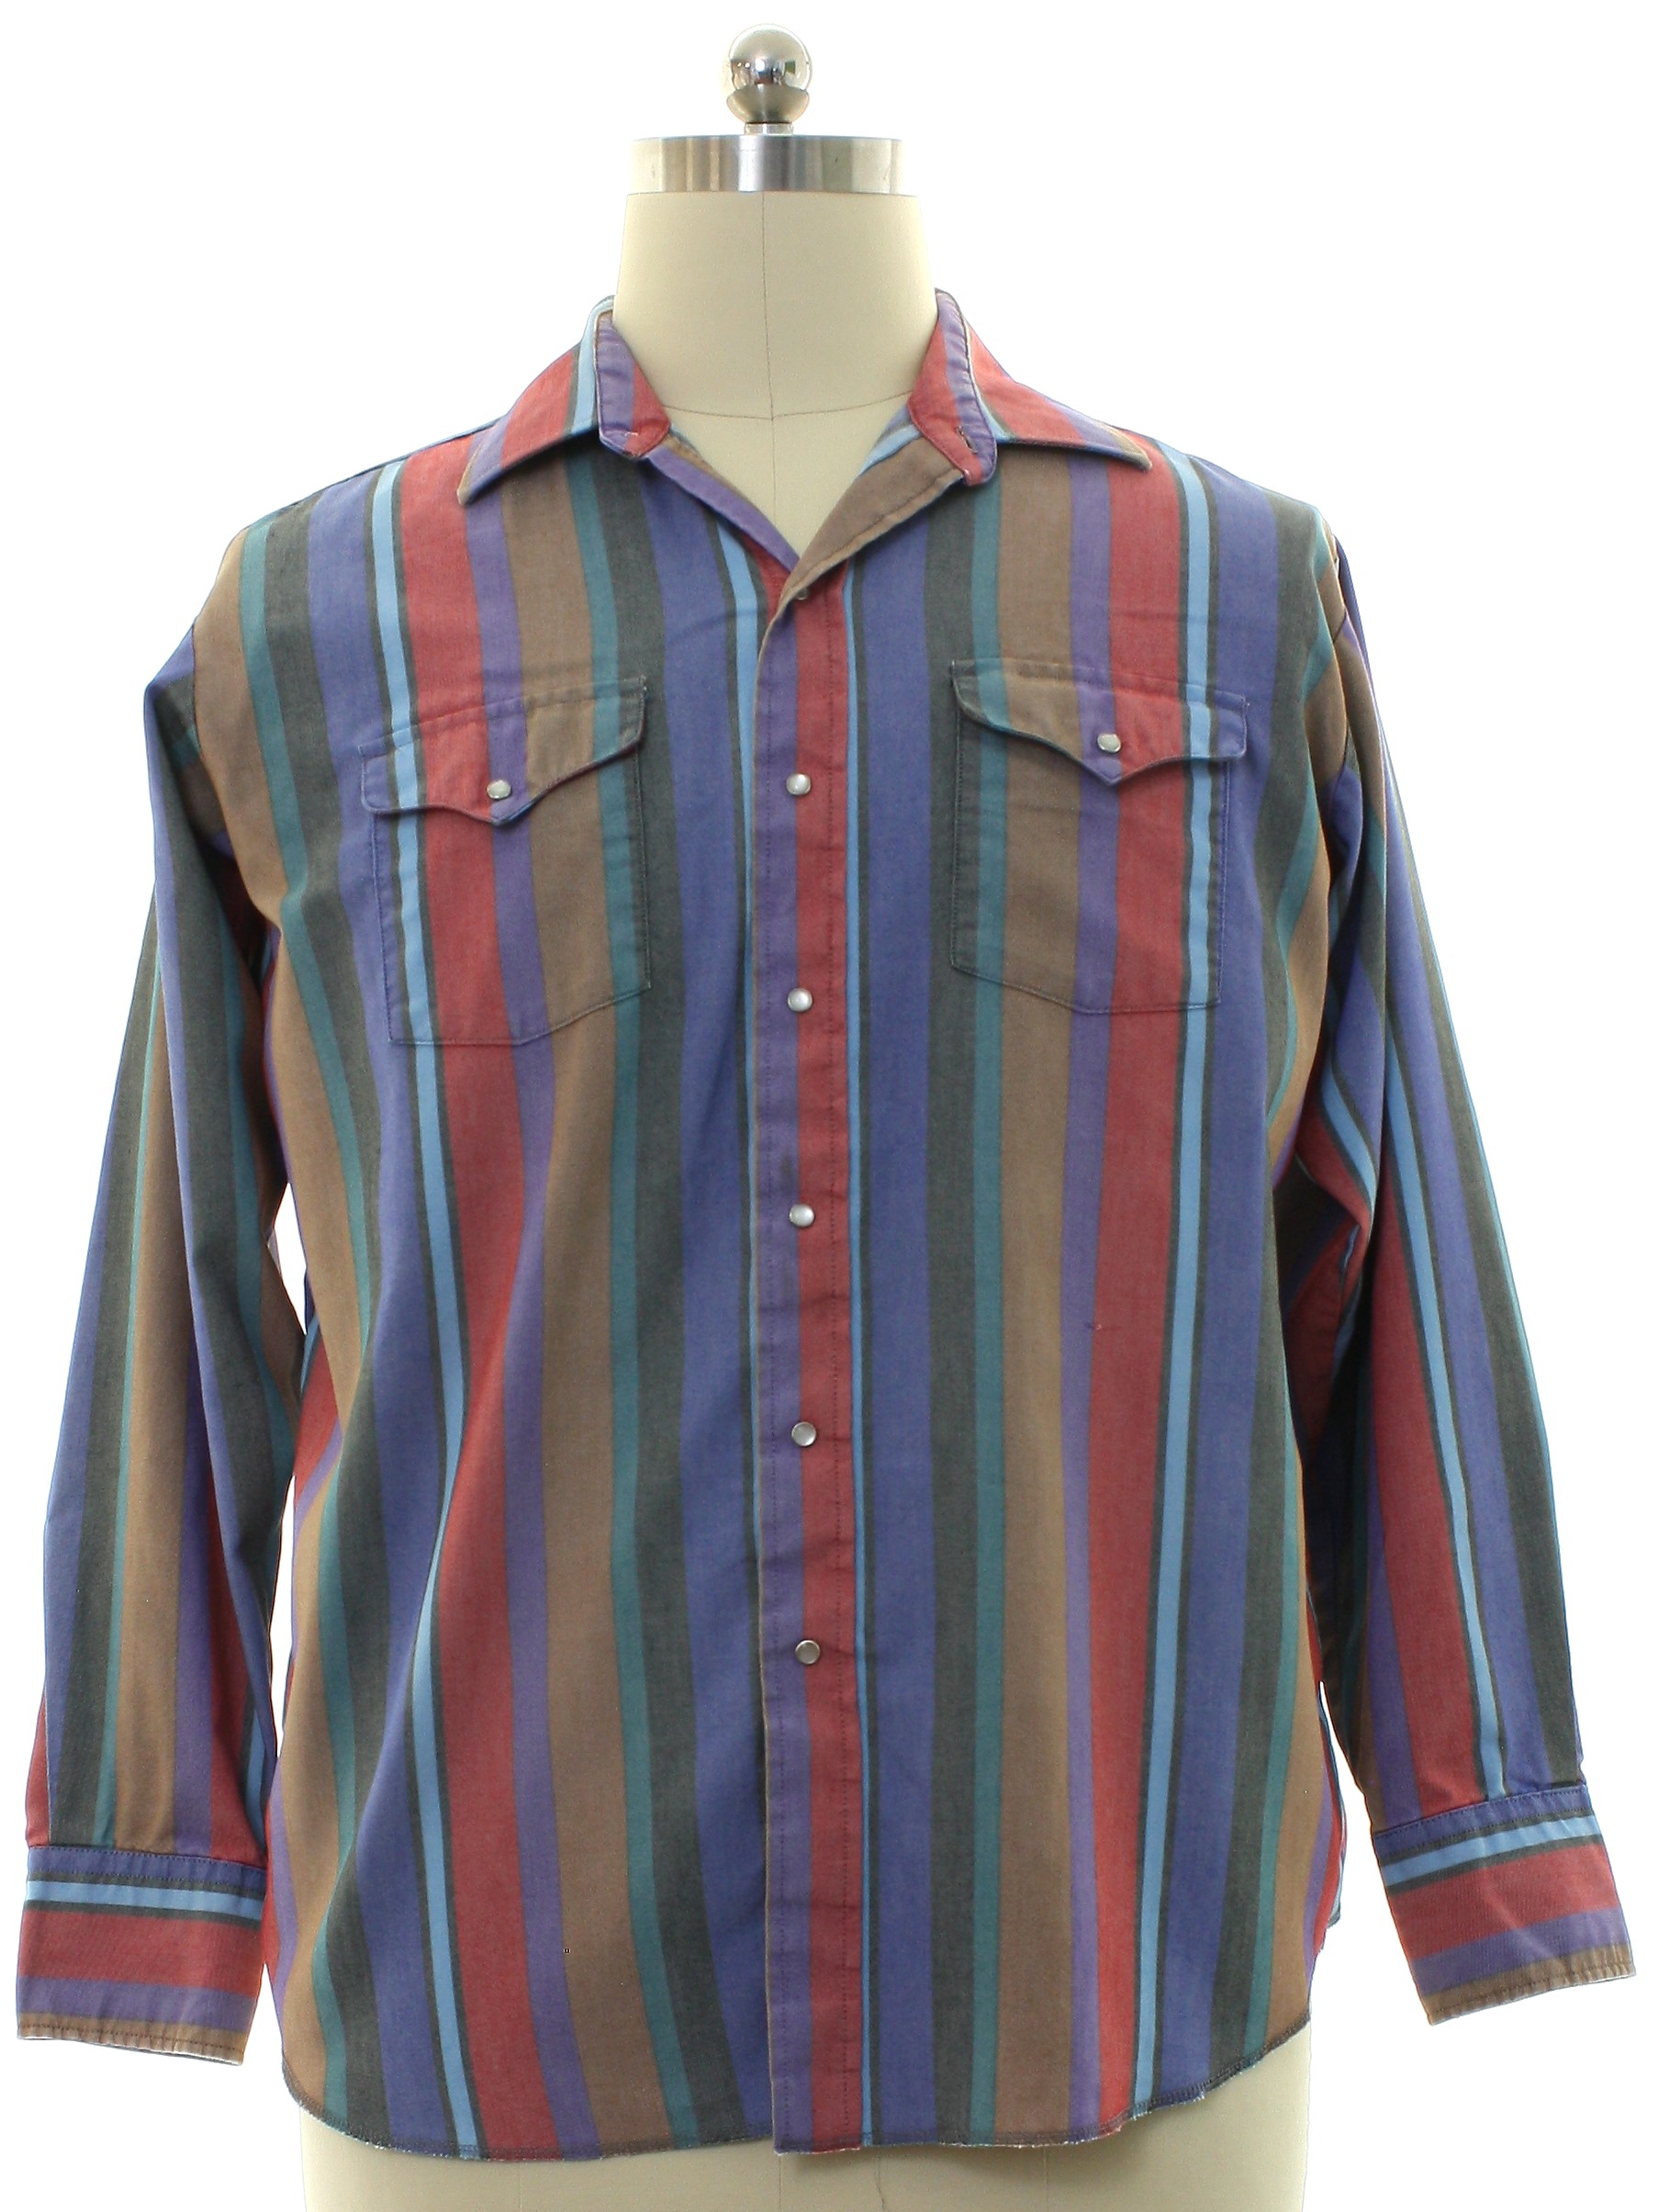 Panhandle Slim 1980s Vintage Western Shirt: Late 80s or early 90s ...